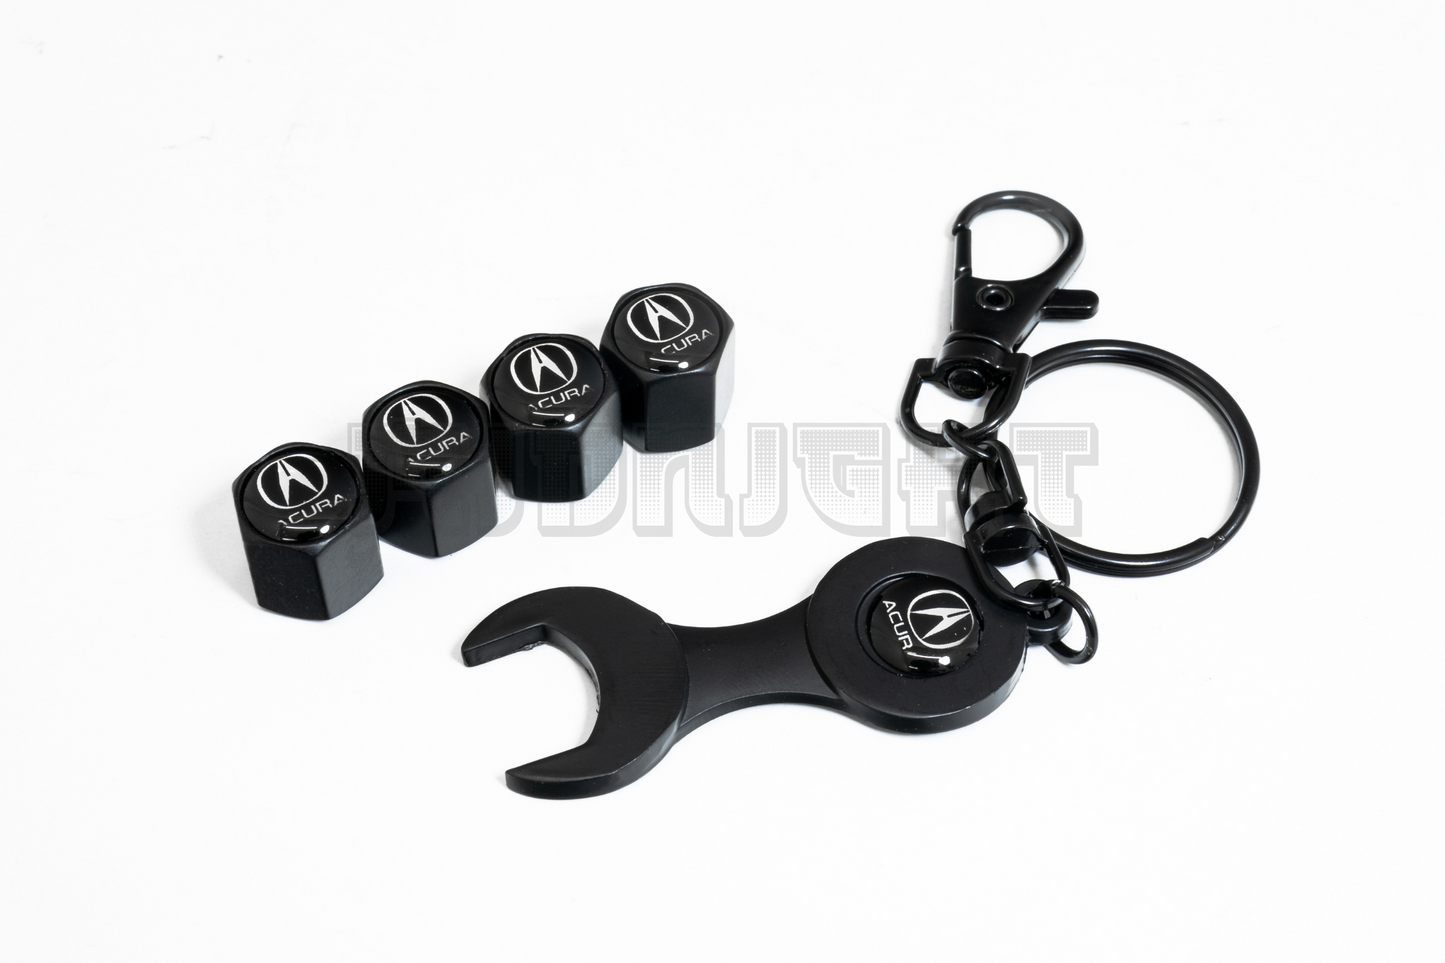 Acura Valve Stem Caps With Wrench Keychain